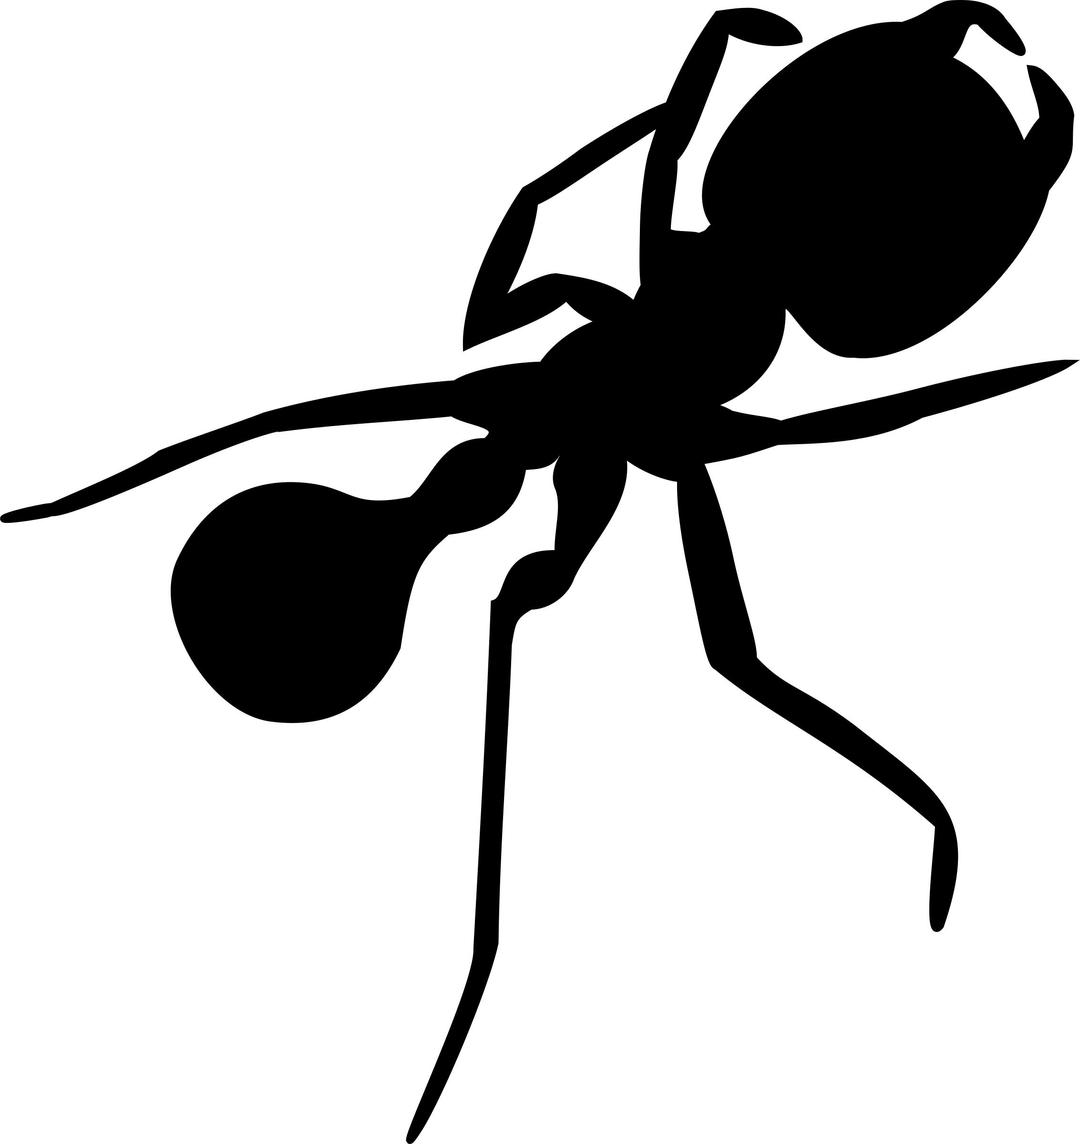 Ant silhouette 1 png transparent